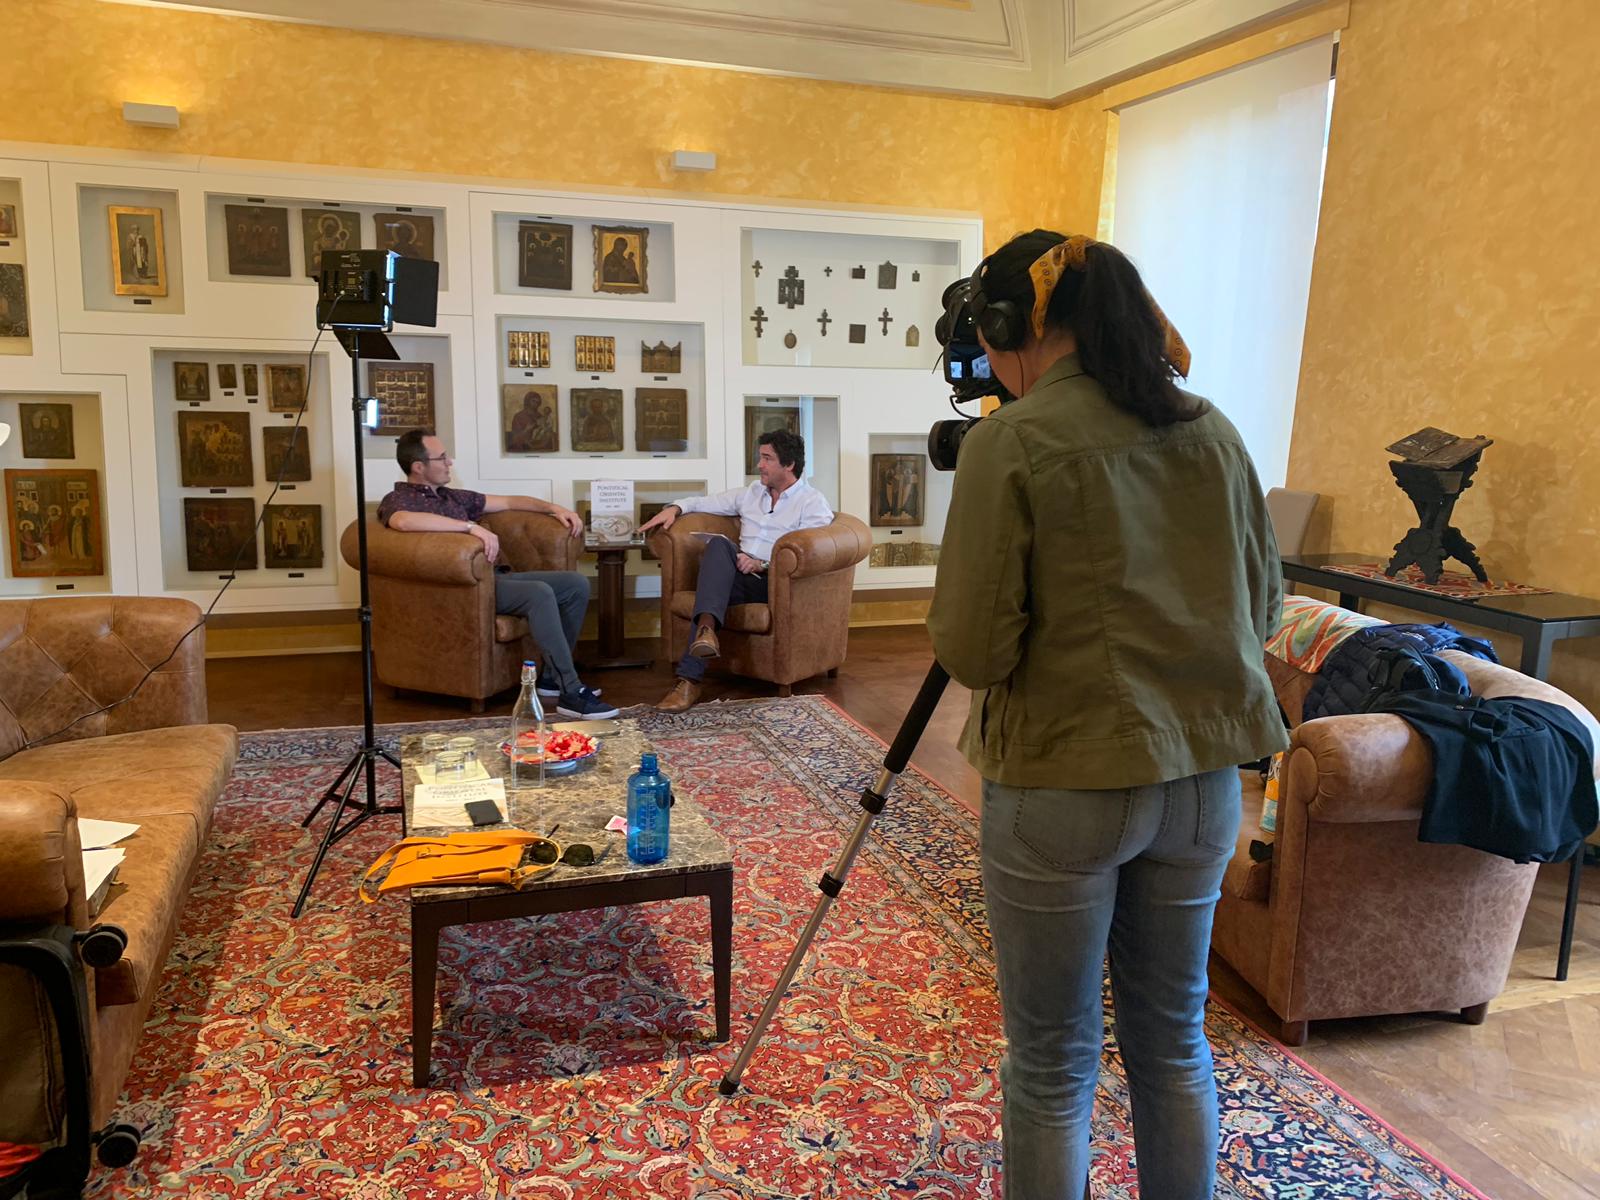 Behind the scenes shot of our Commpro Team conducting interviews at the 2019 Humanity 2.0 forum.